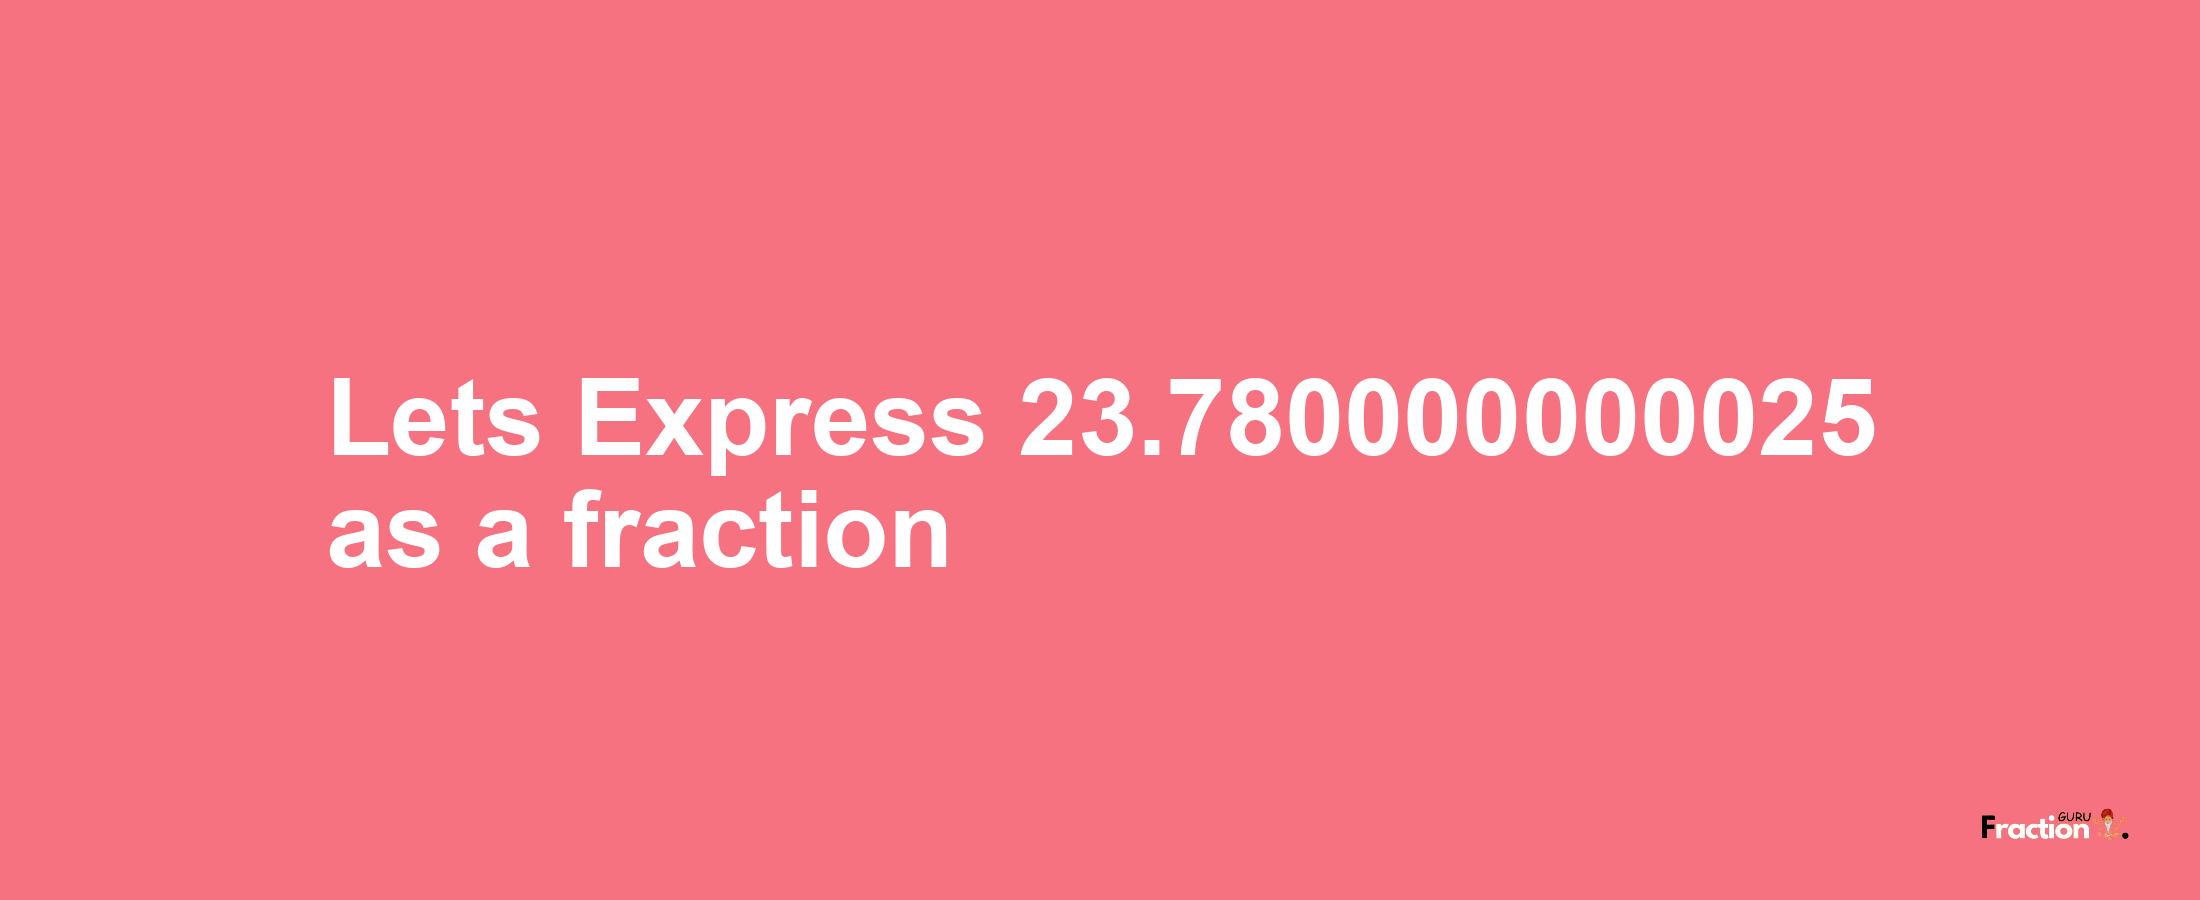 Lets Express 23.780000000025 as afraction